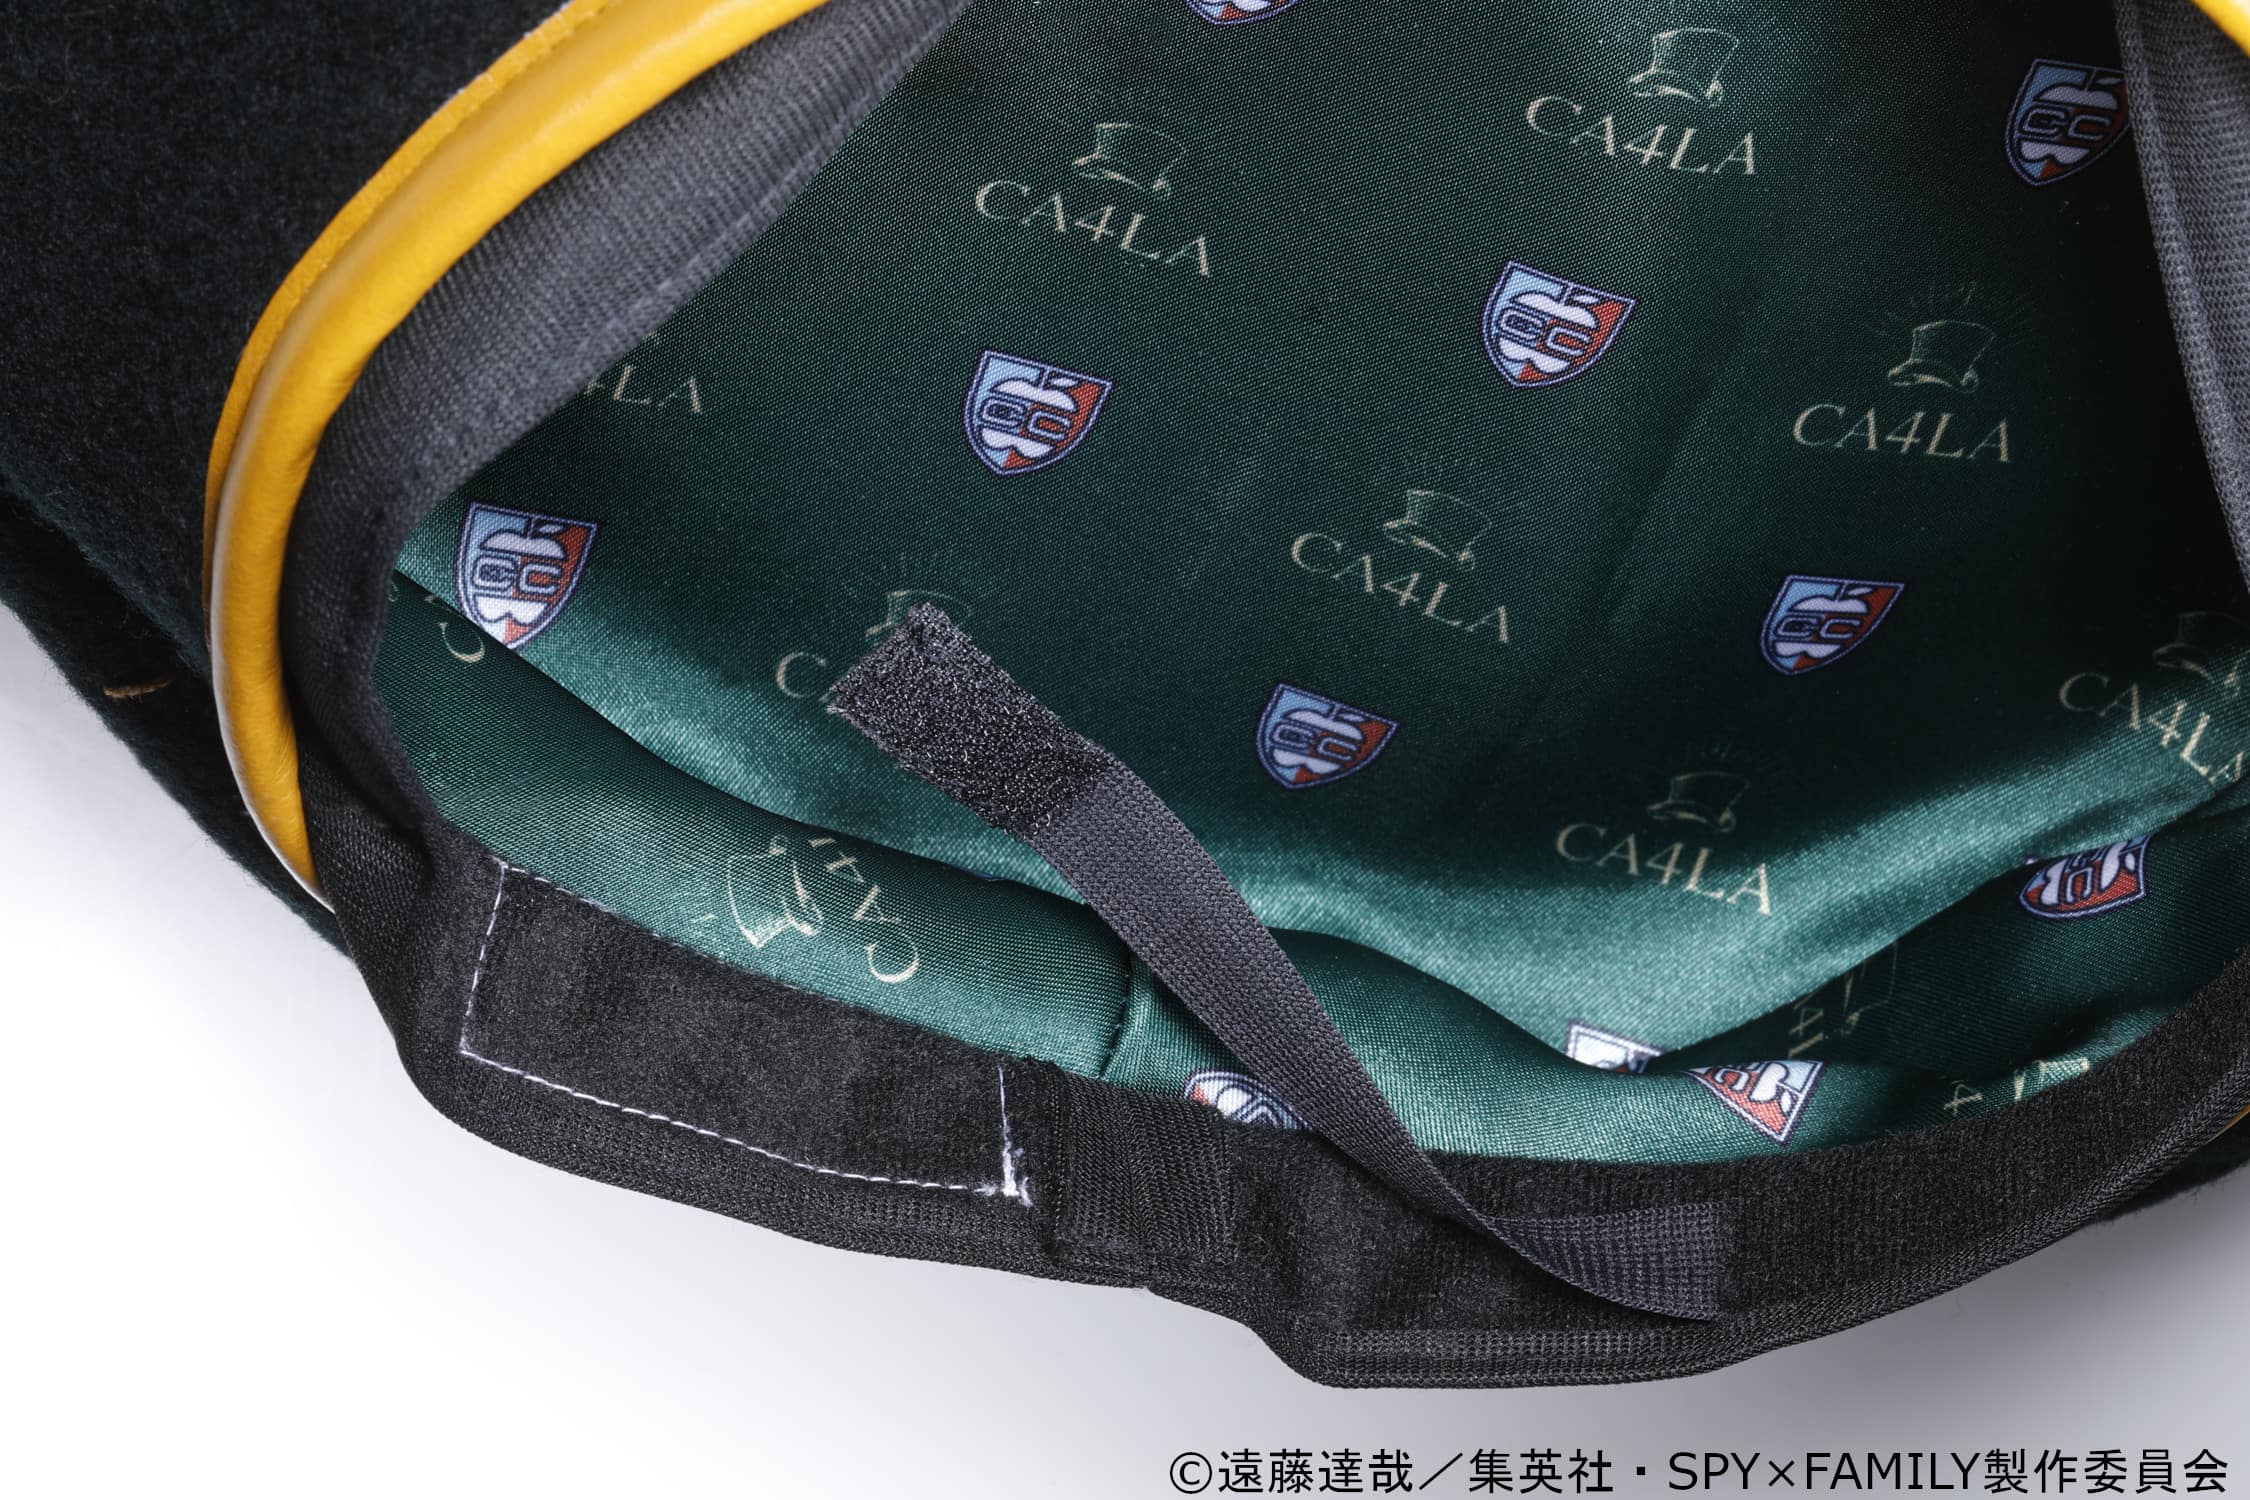 Ryokotomo - 415ab9a5 ca4la releases spy x family hats inspired by loid and